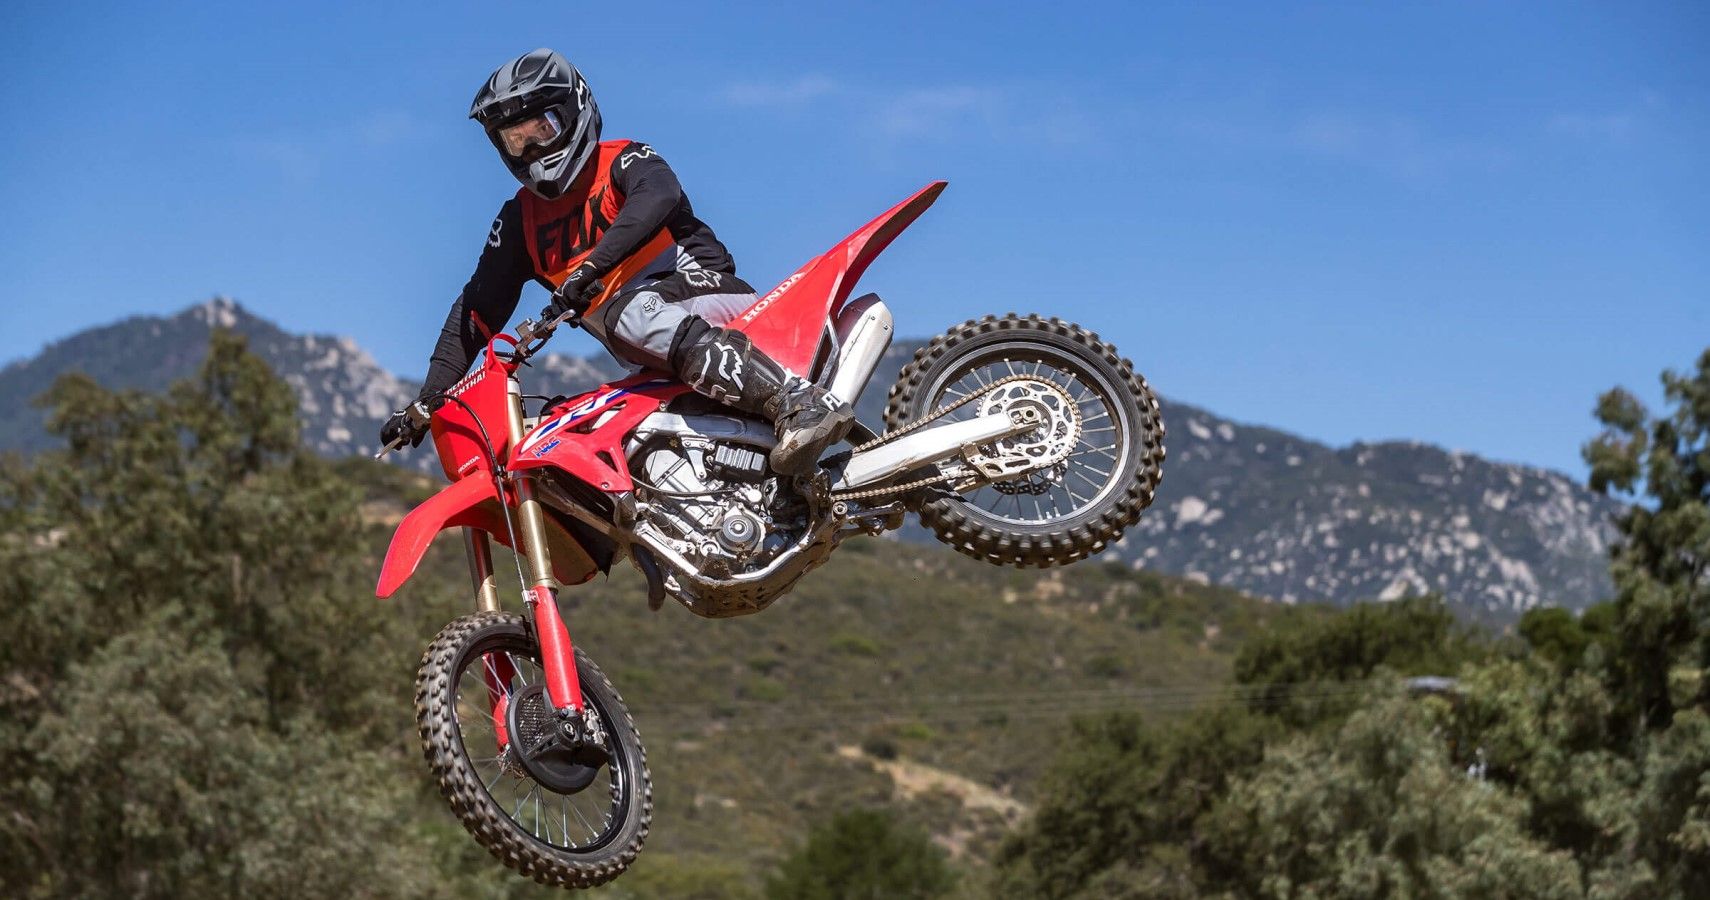 This Is Why The CRF450R Is One Of The Best Honda Dirt Bikes Ever Built